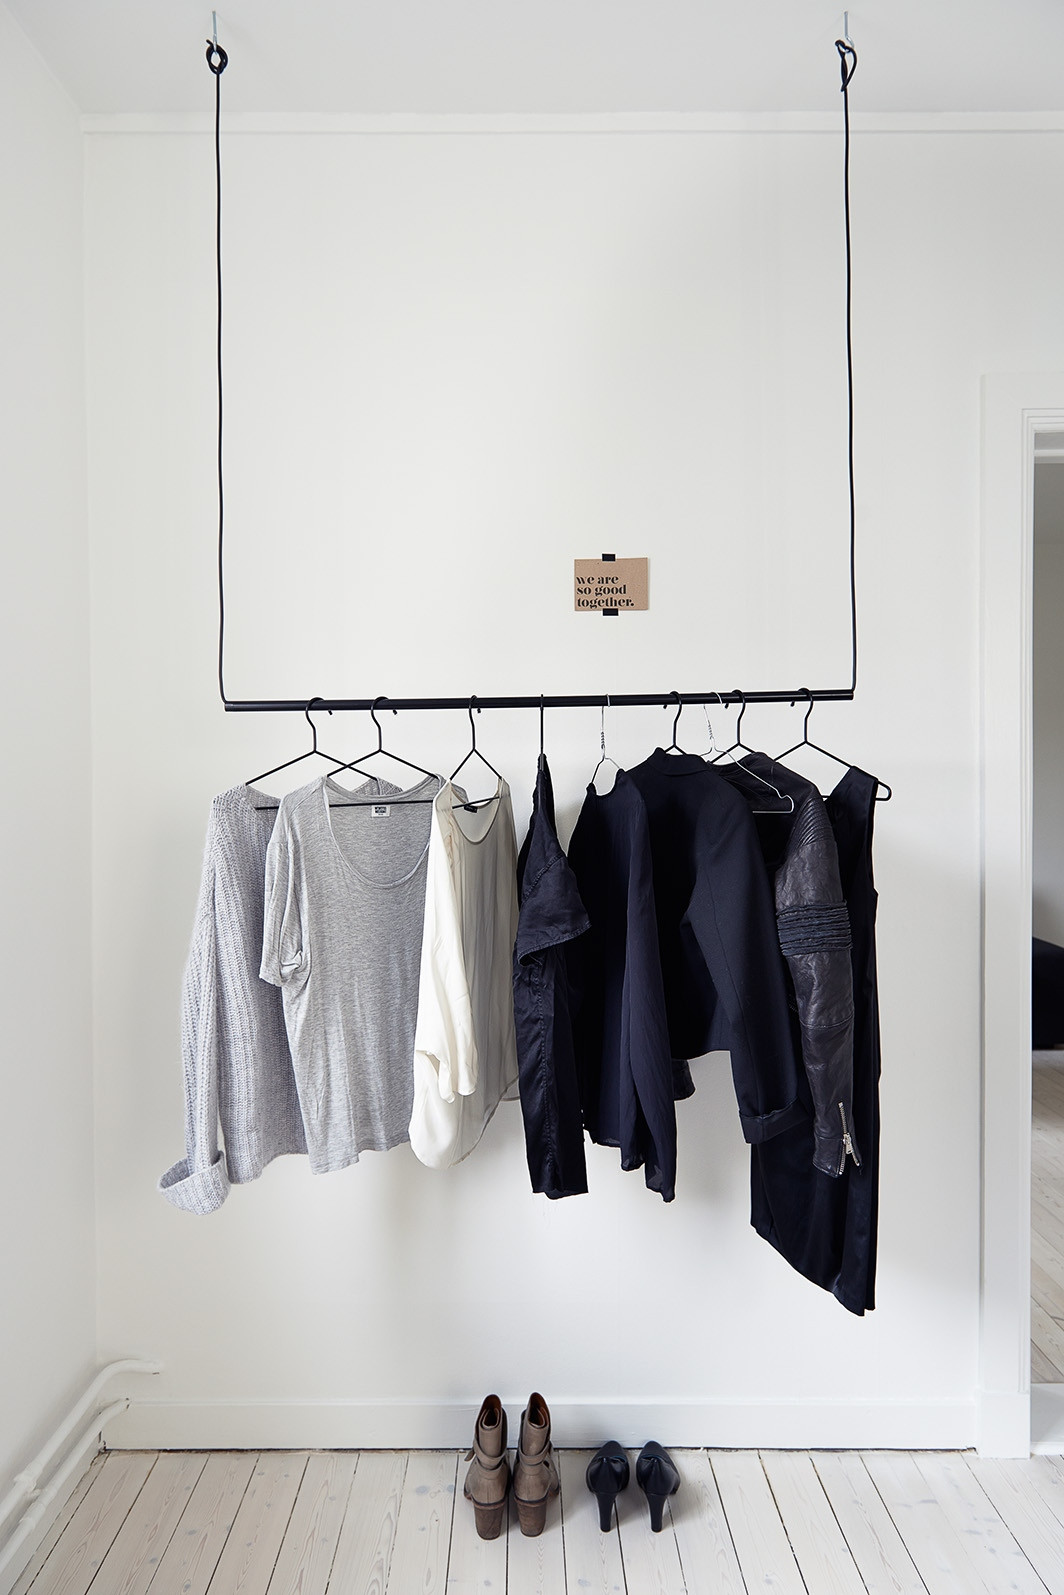 DIY Hanging Clothes Rack From Ceiling
 Smart Design Solutions For Hiding Wires in Your Home